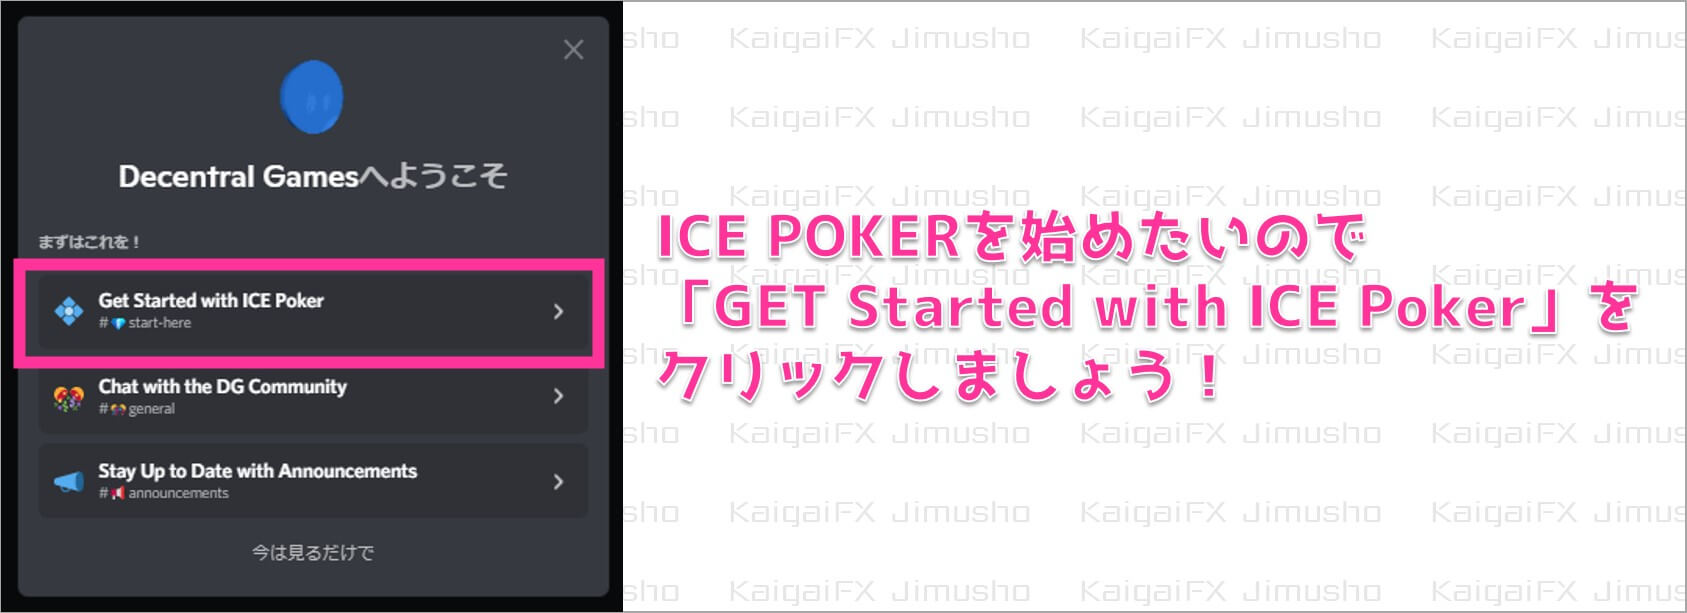 GET Started with ICE Poker